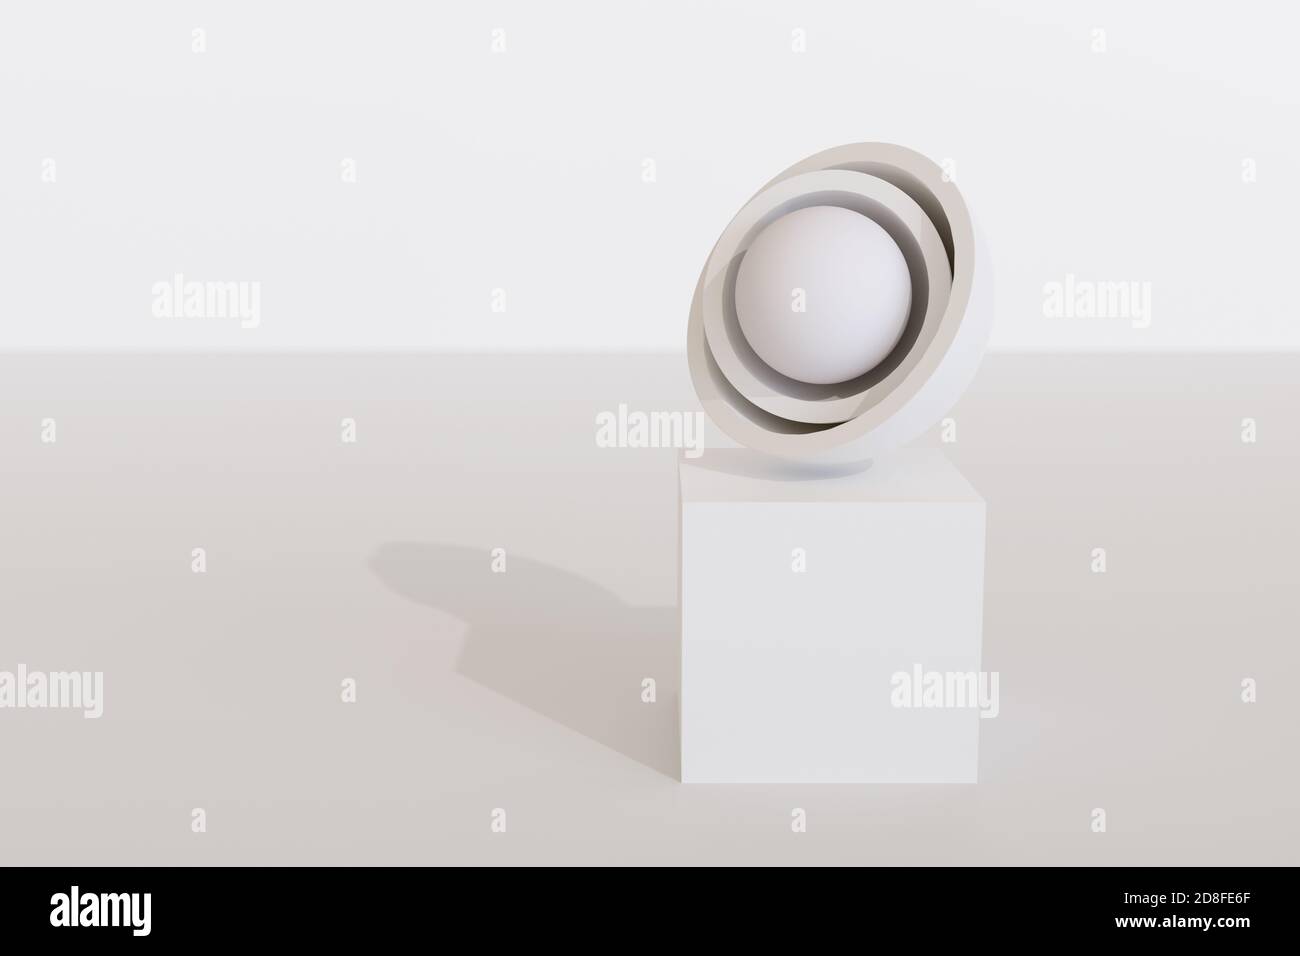 Sphere within two semi spherical caps on a cube with white background. Abstract art. 3d illustration. Stock Photo